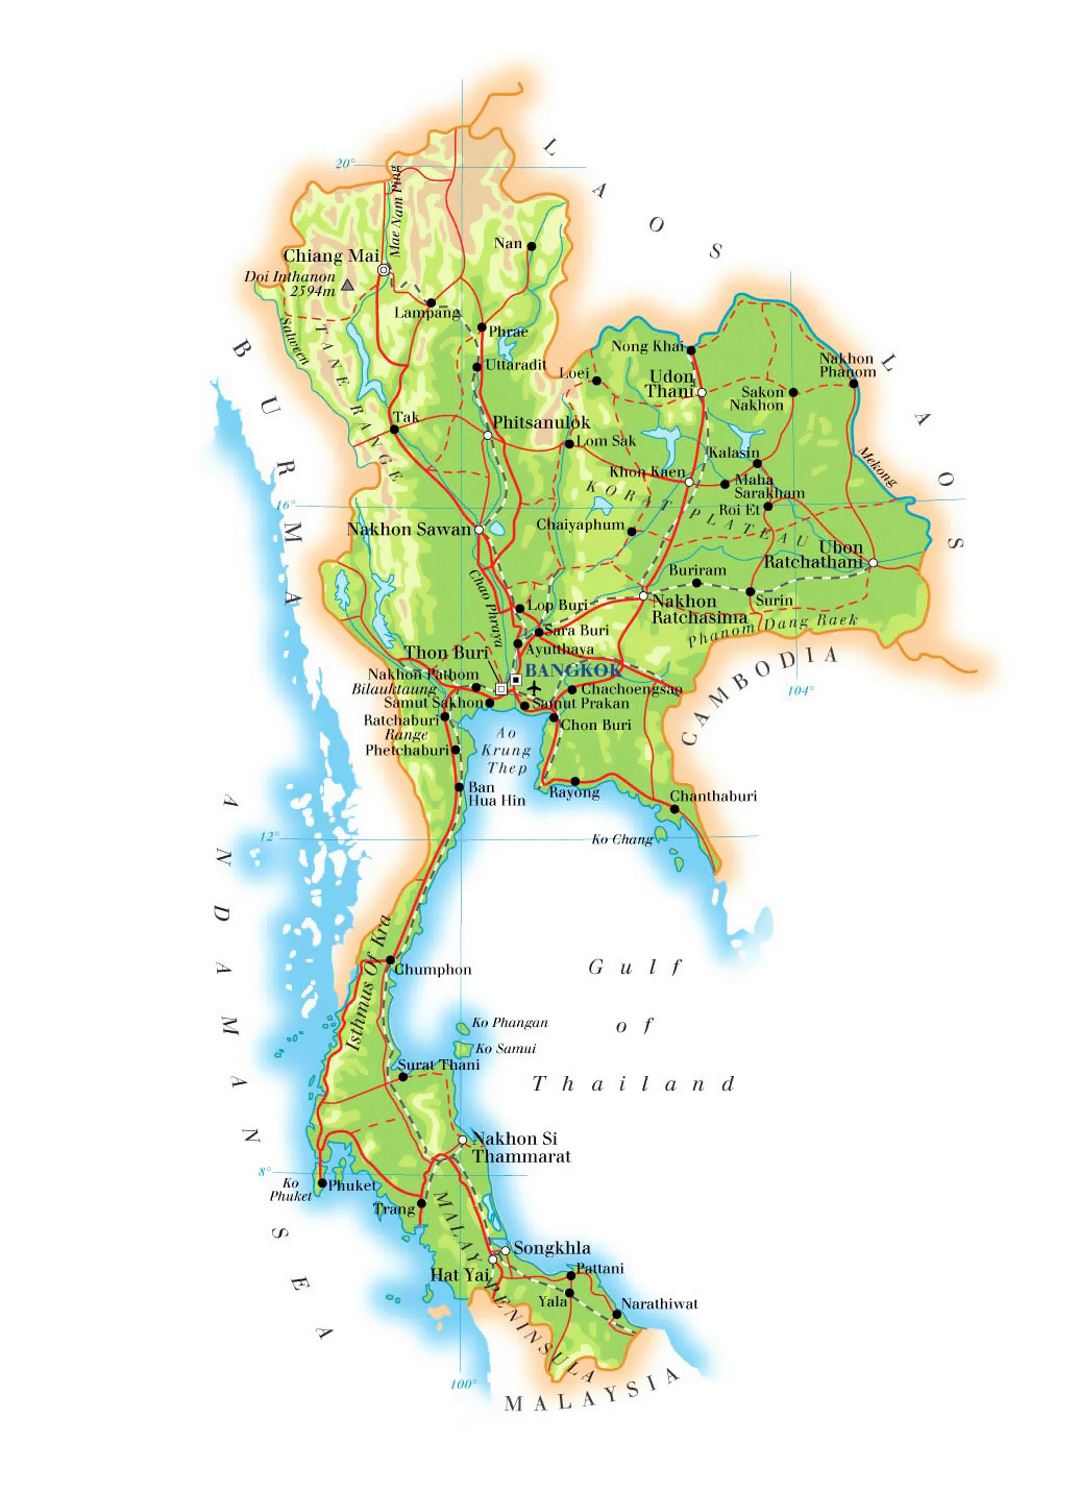 Detailed elevation map of Thailand with roads, railroads, major cities and airports